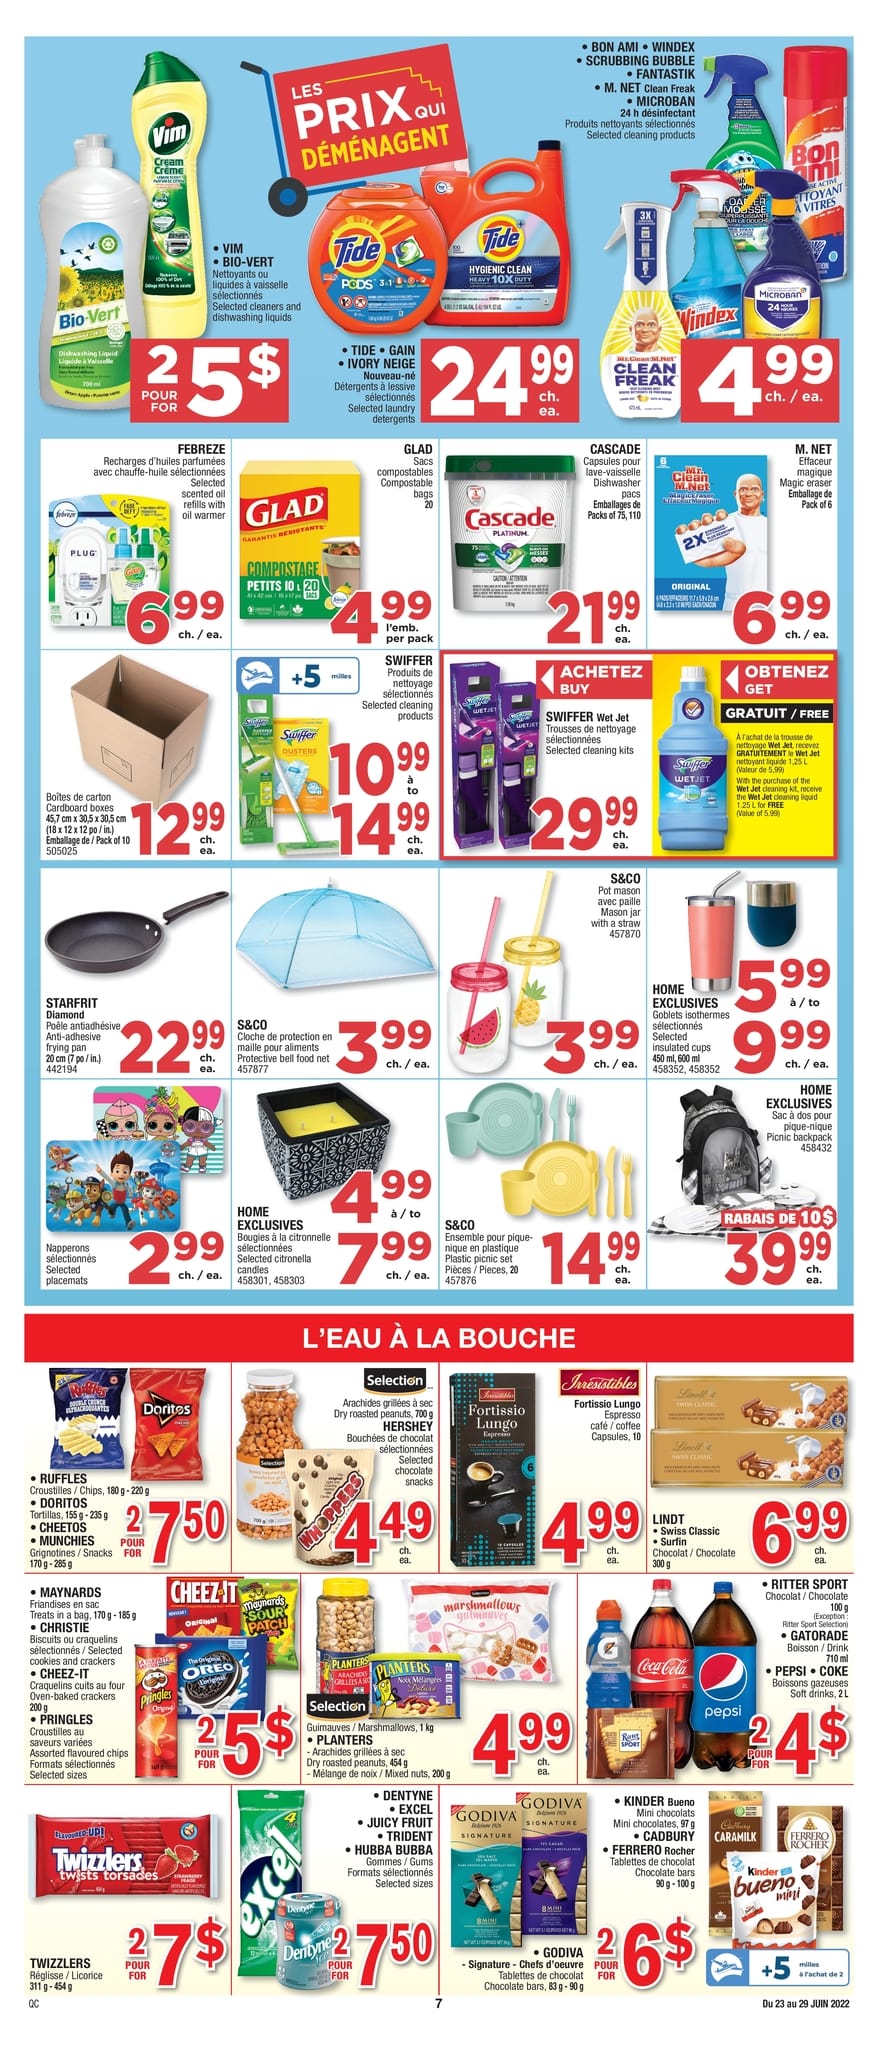 Circulaire Jean Coutu - Page 7